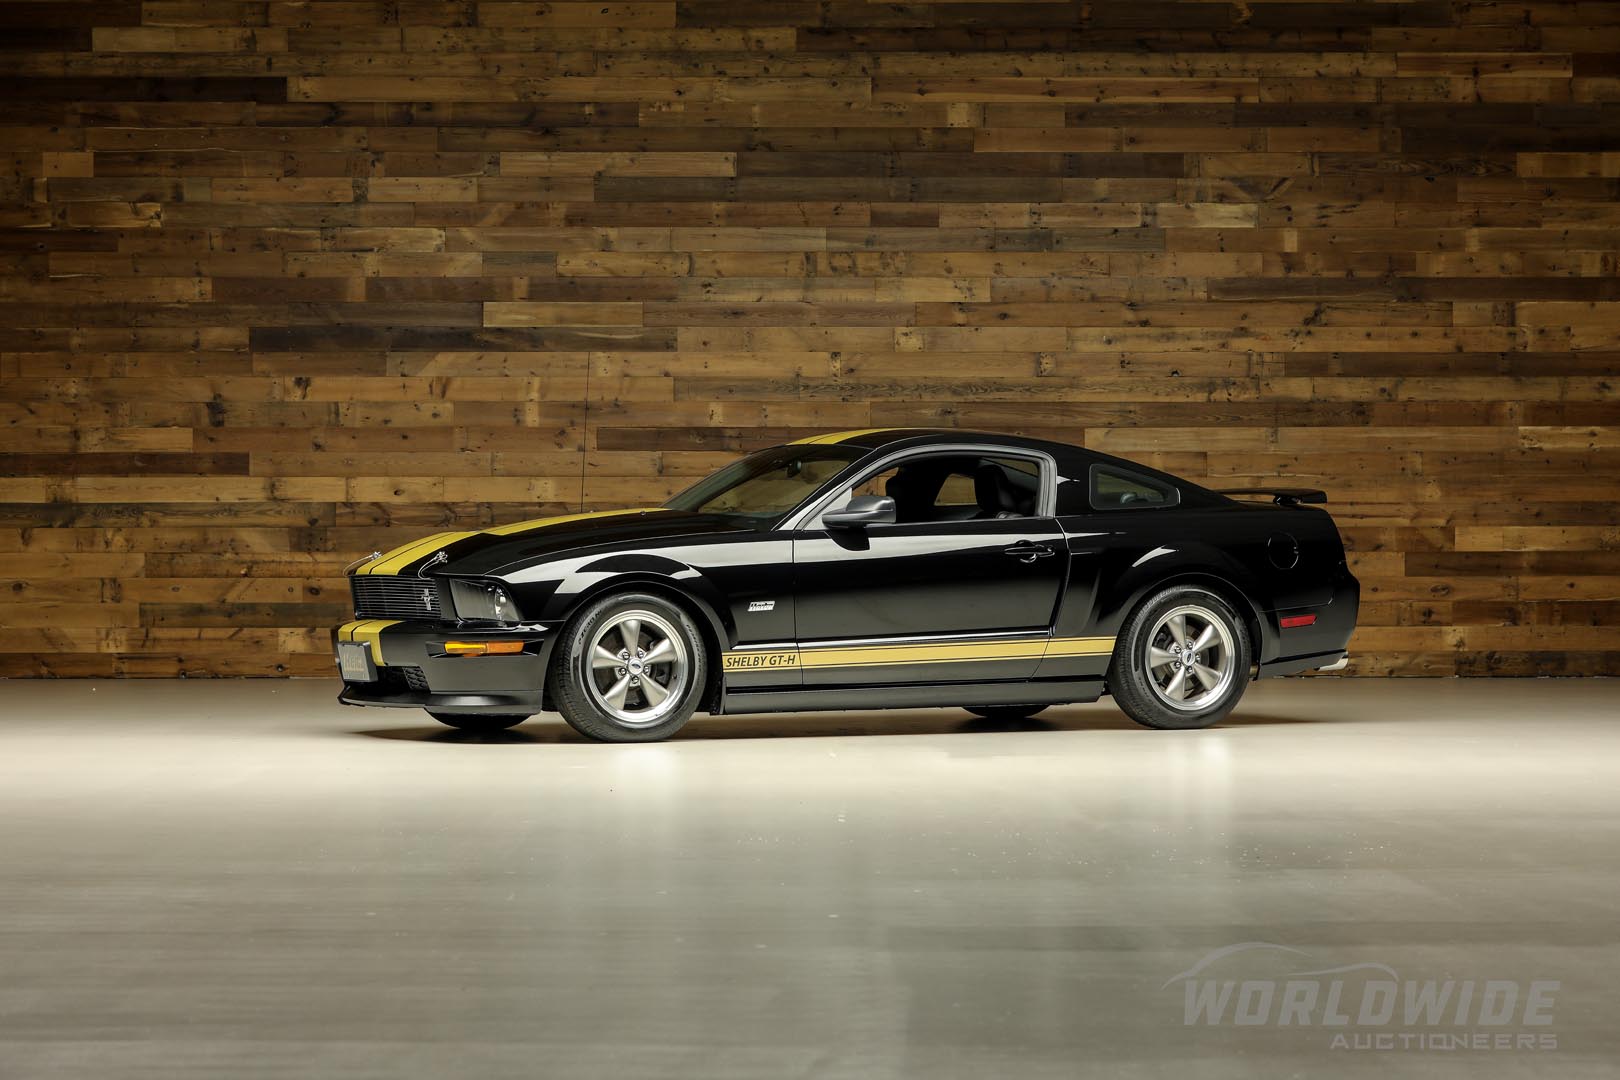 2006 Ford Mustang Hertz Shelby GT-H Coupe